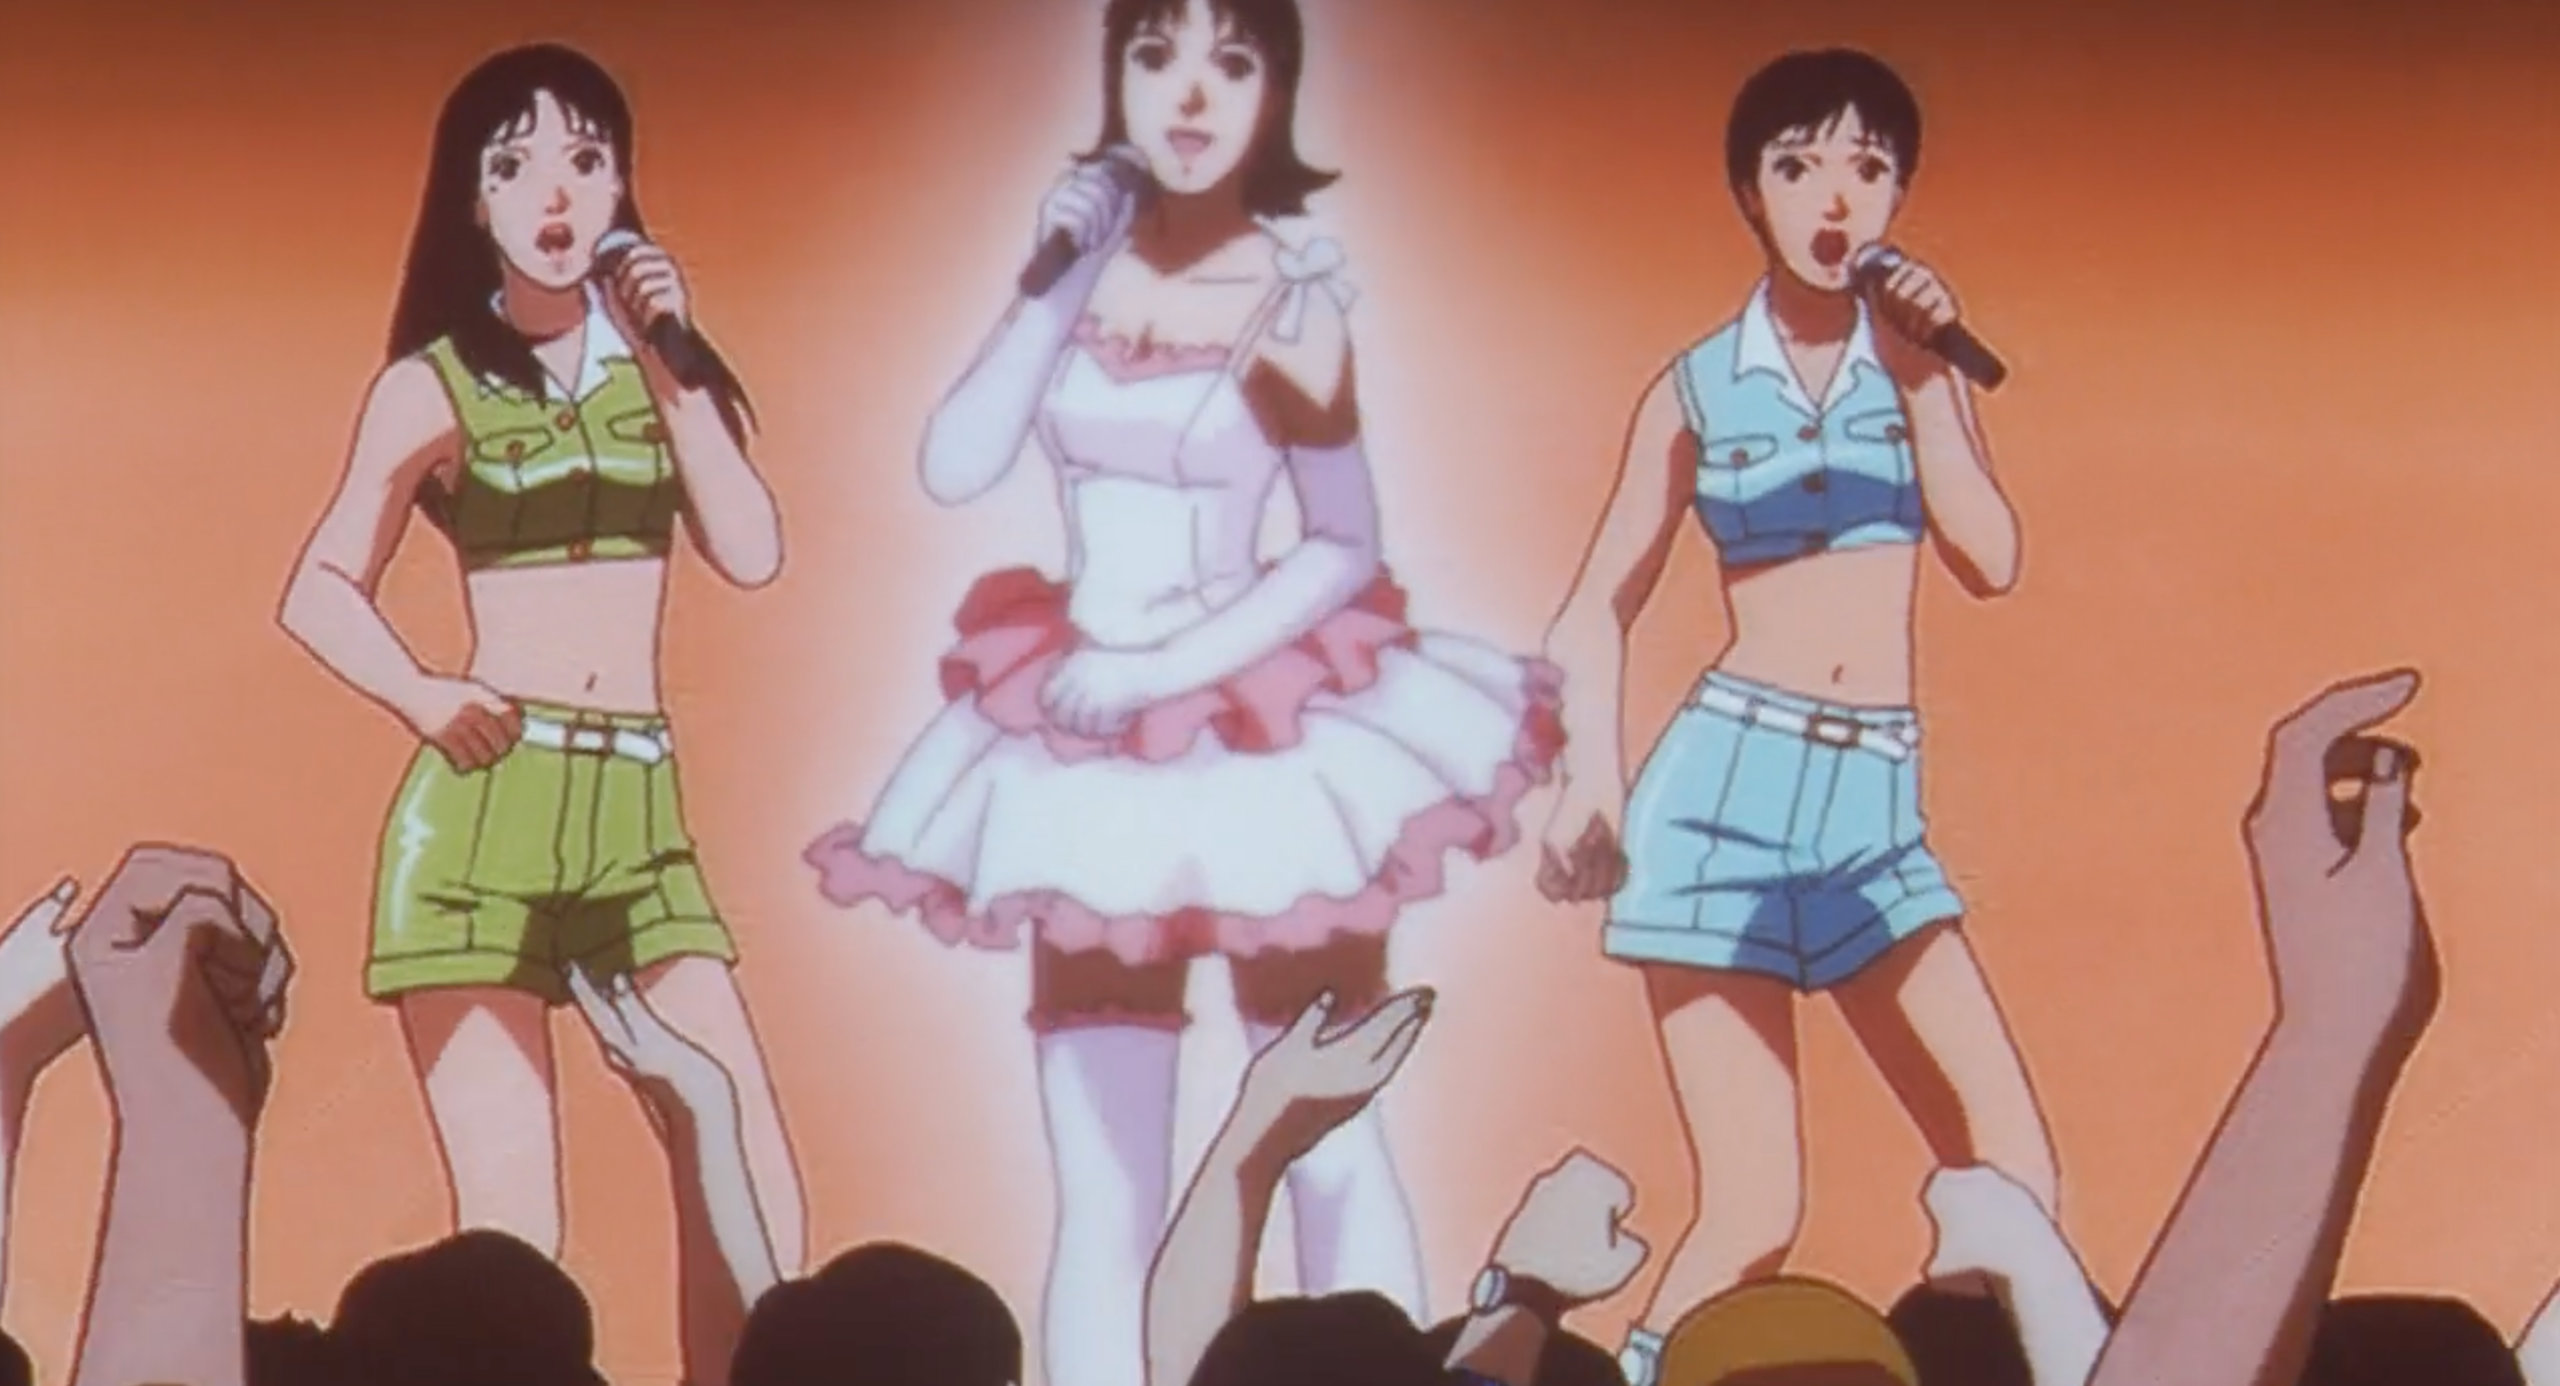 A glowing version of Mima performs with CHAM! at a concert in Perfect Blue